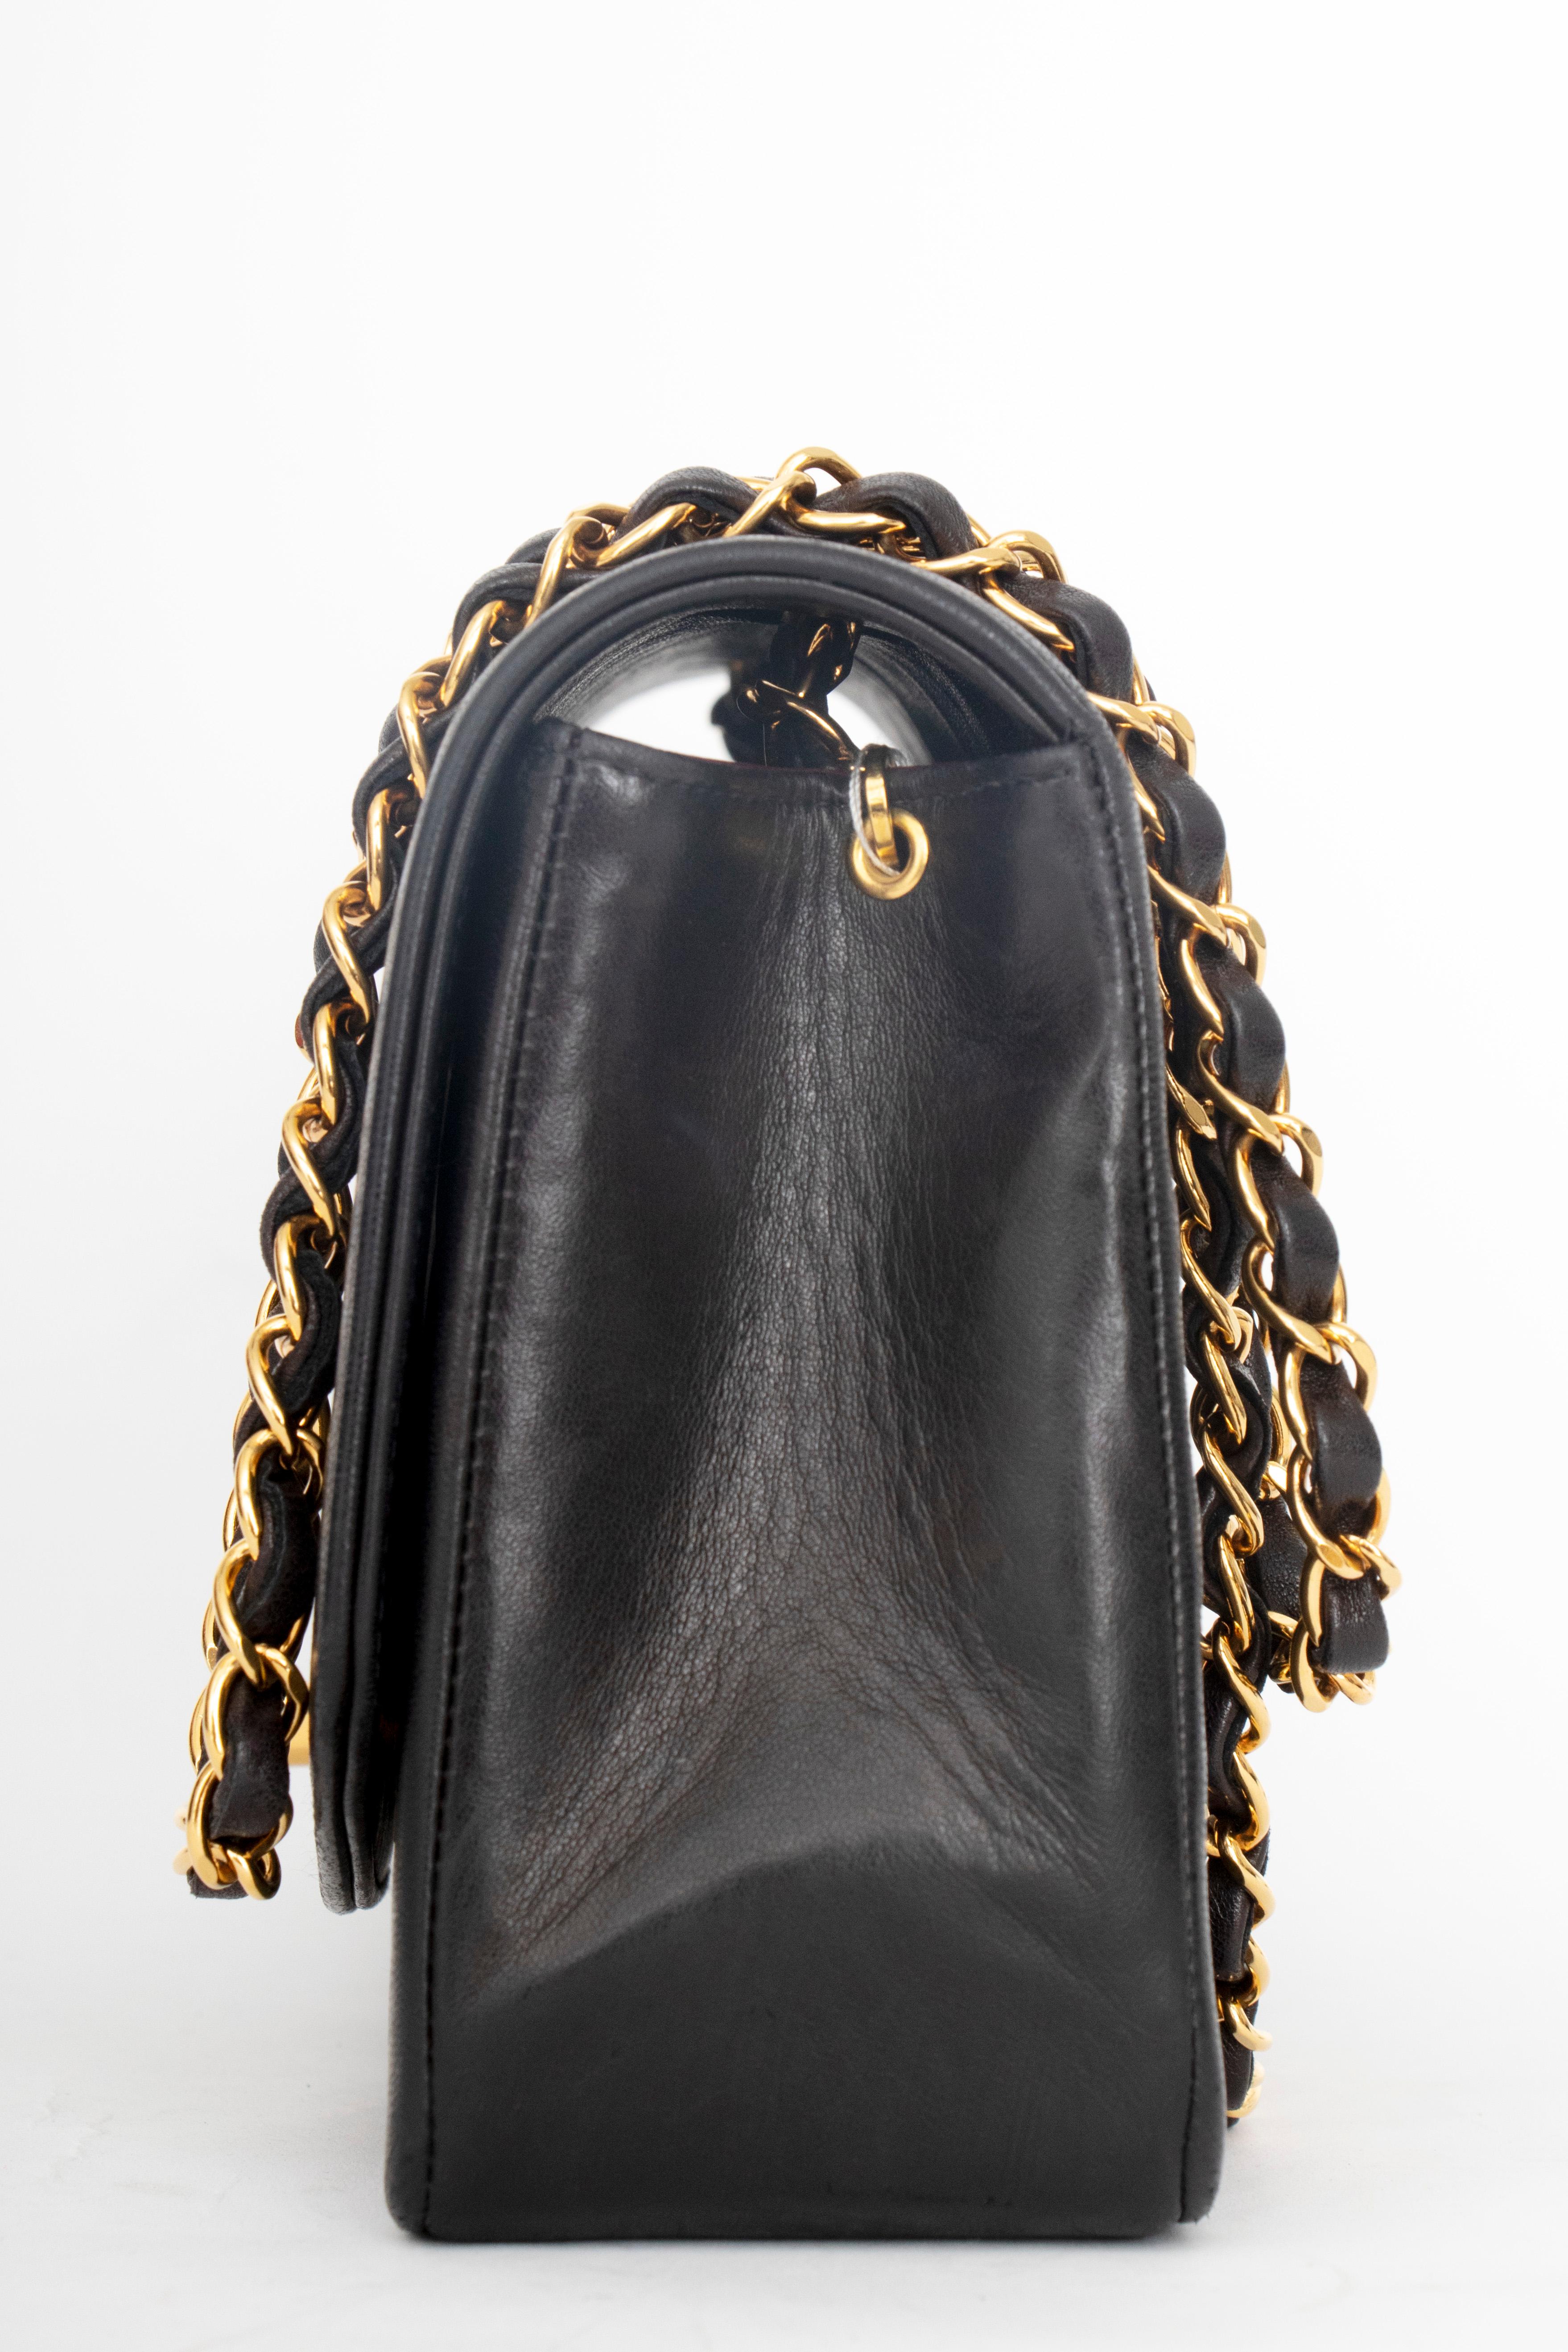 A 1990s Chanel black quilted lambskin shoulder bag with gold hardware. 

The bag has the following measurements:
Length: 25 cm
Depth: 7.5 cm
Hight: 15 cm
